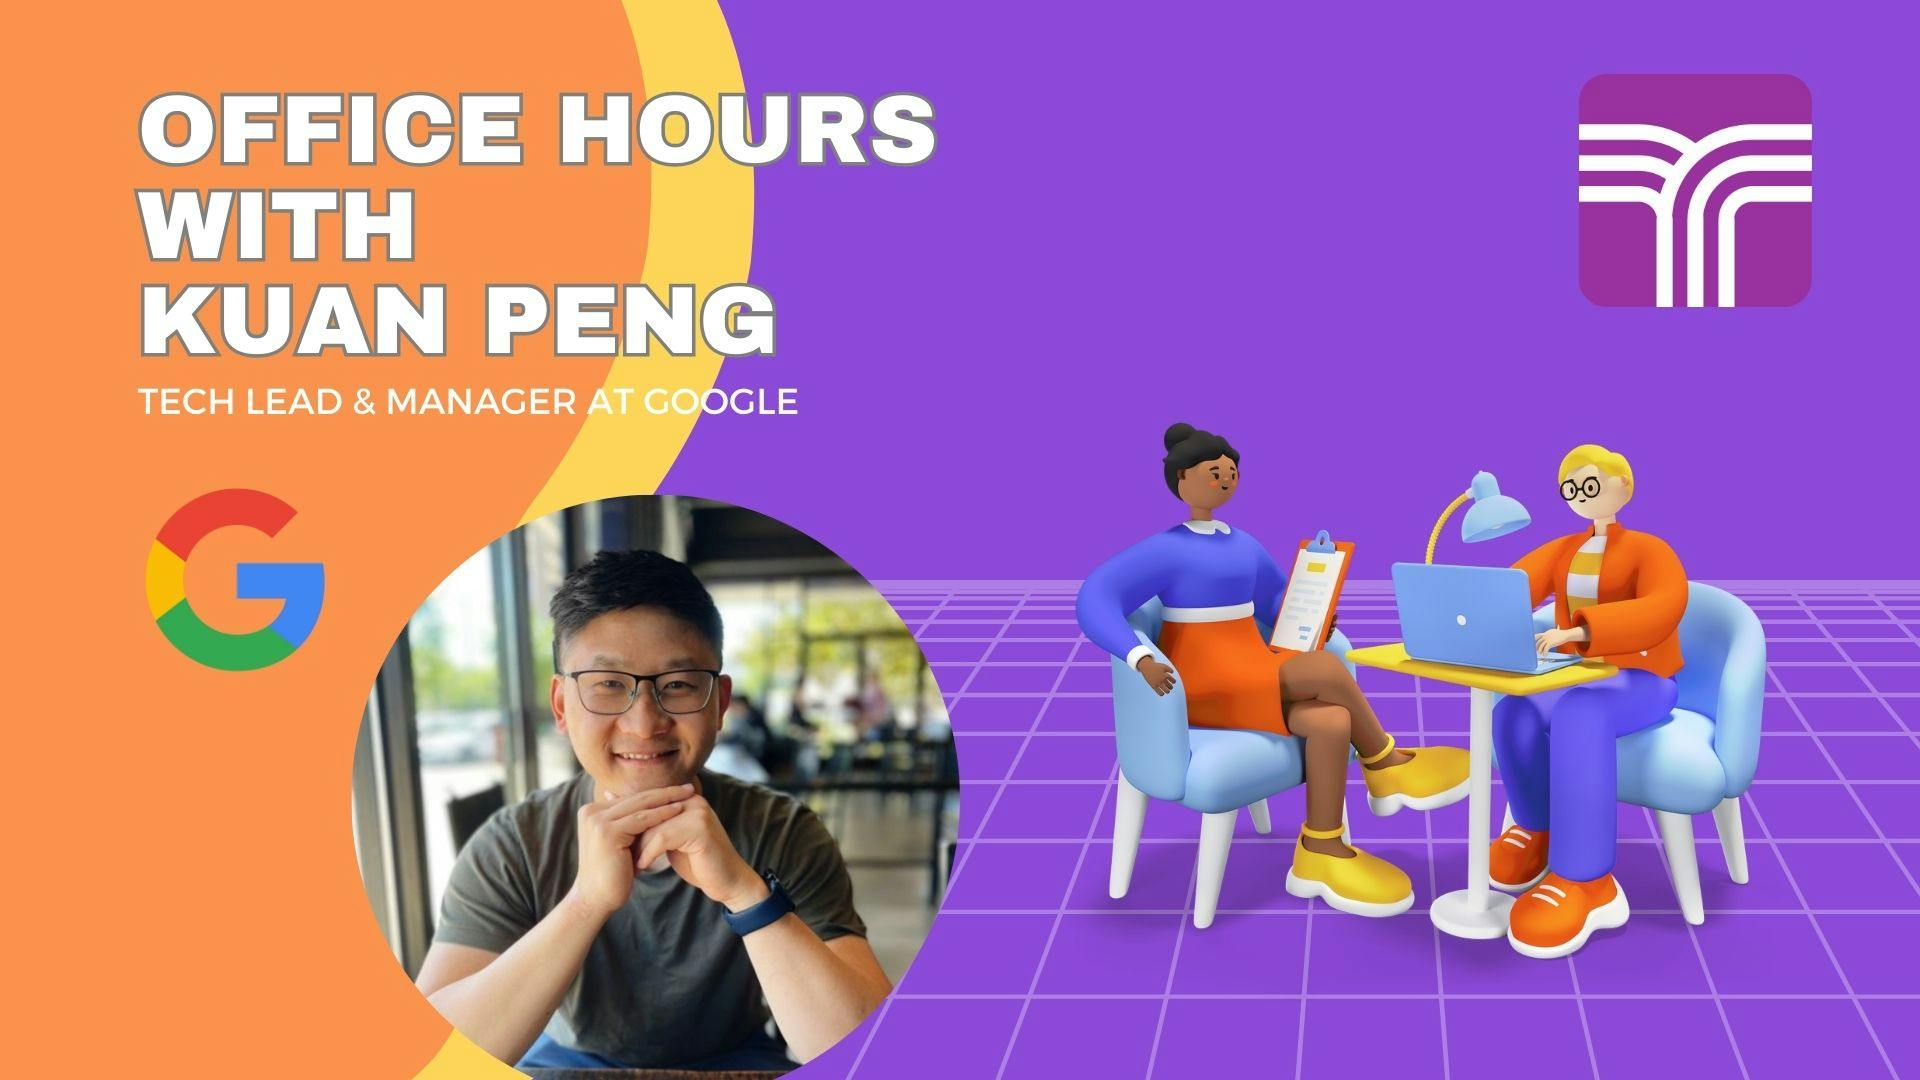 Group Office Hours with Kuan Peng (Google Tech Lead And Manager) event